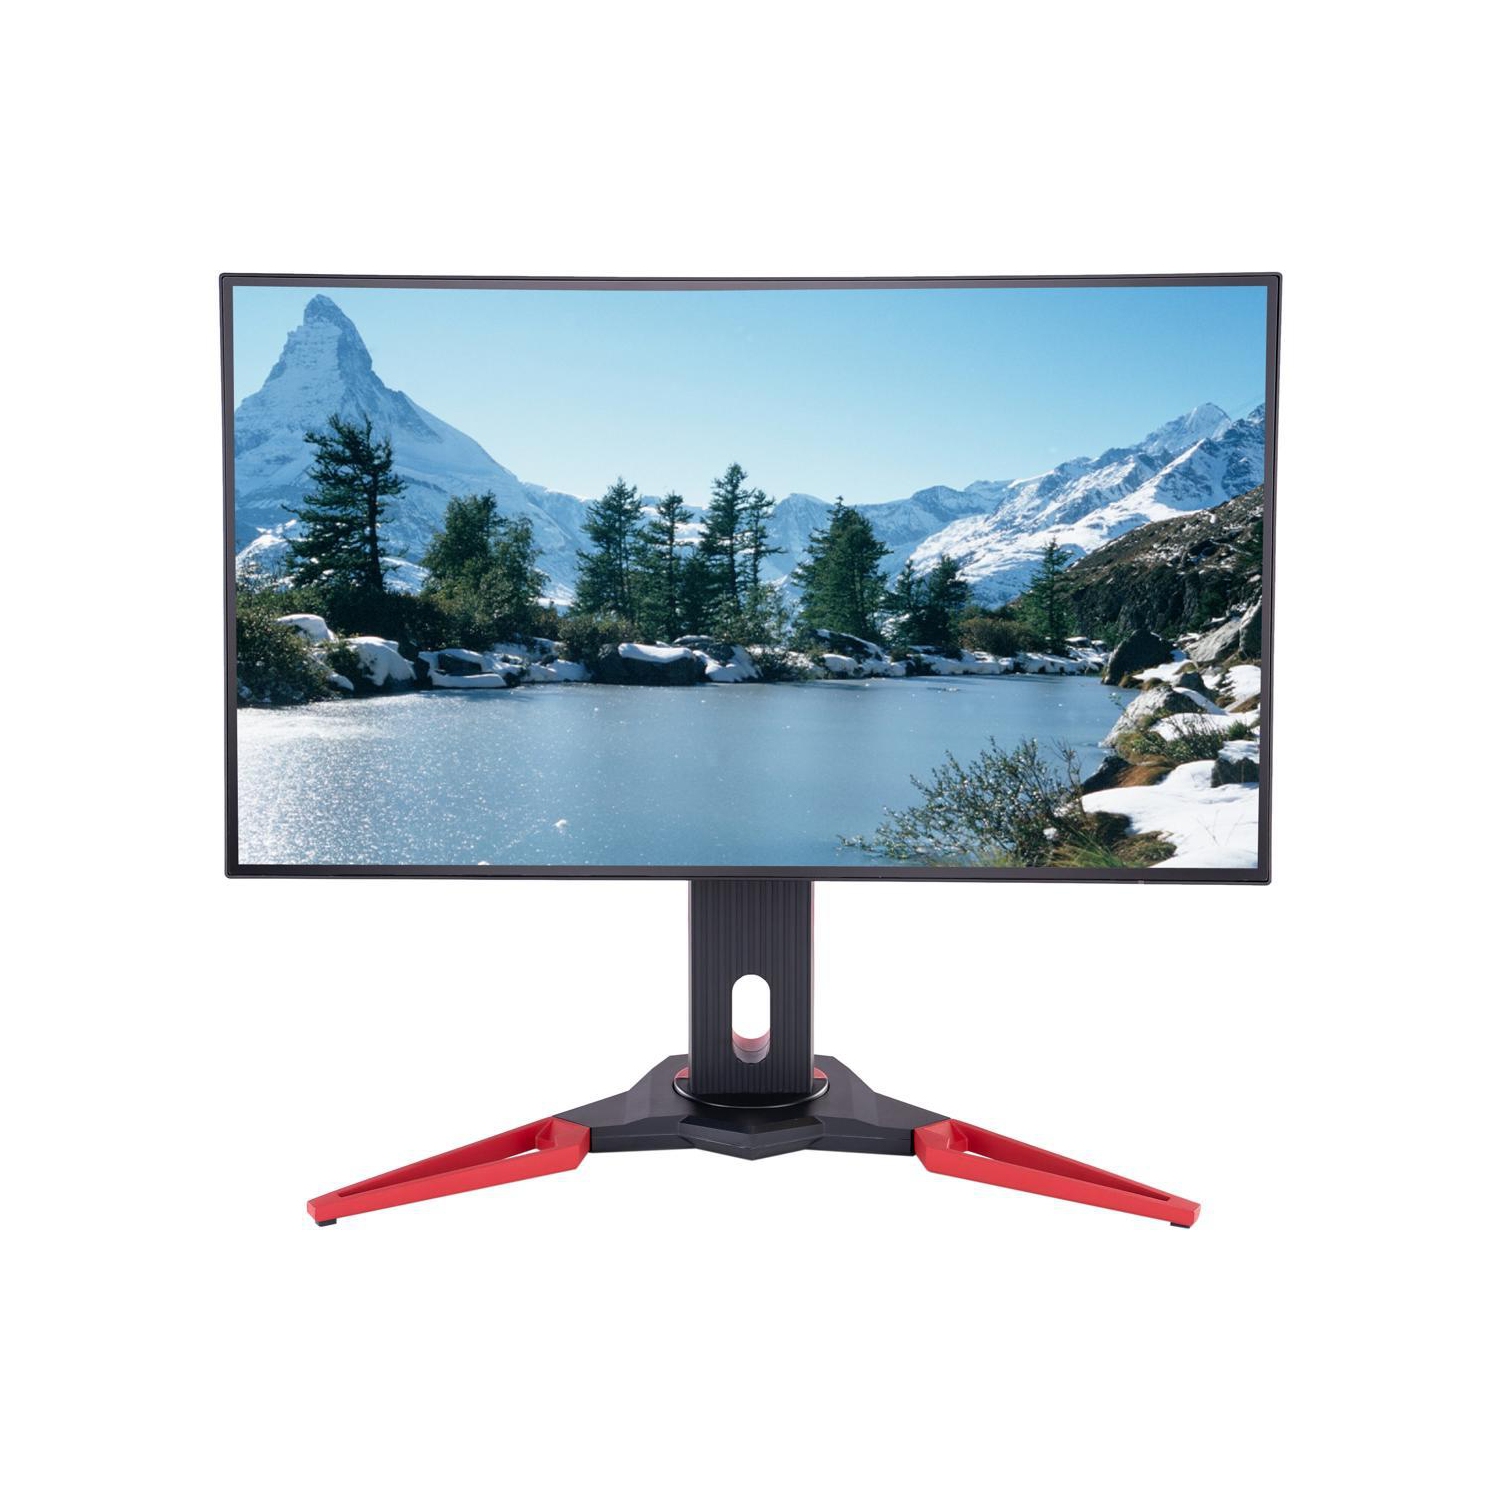 AXIOM 2789 27" WQHD 2560 x 1440 60Hz 4 Side Borderless Monitor, Adaptive-Sync (FreeSync Compatible), Height Adjustable Stand, Display Port/HDMI Port, with Speaker